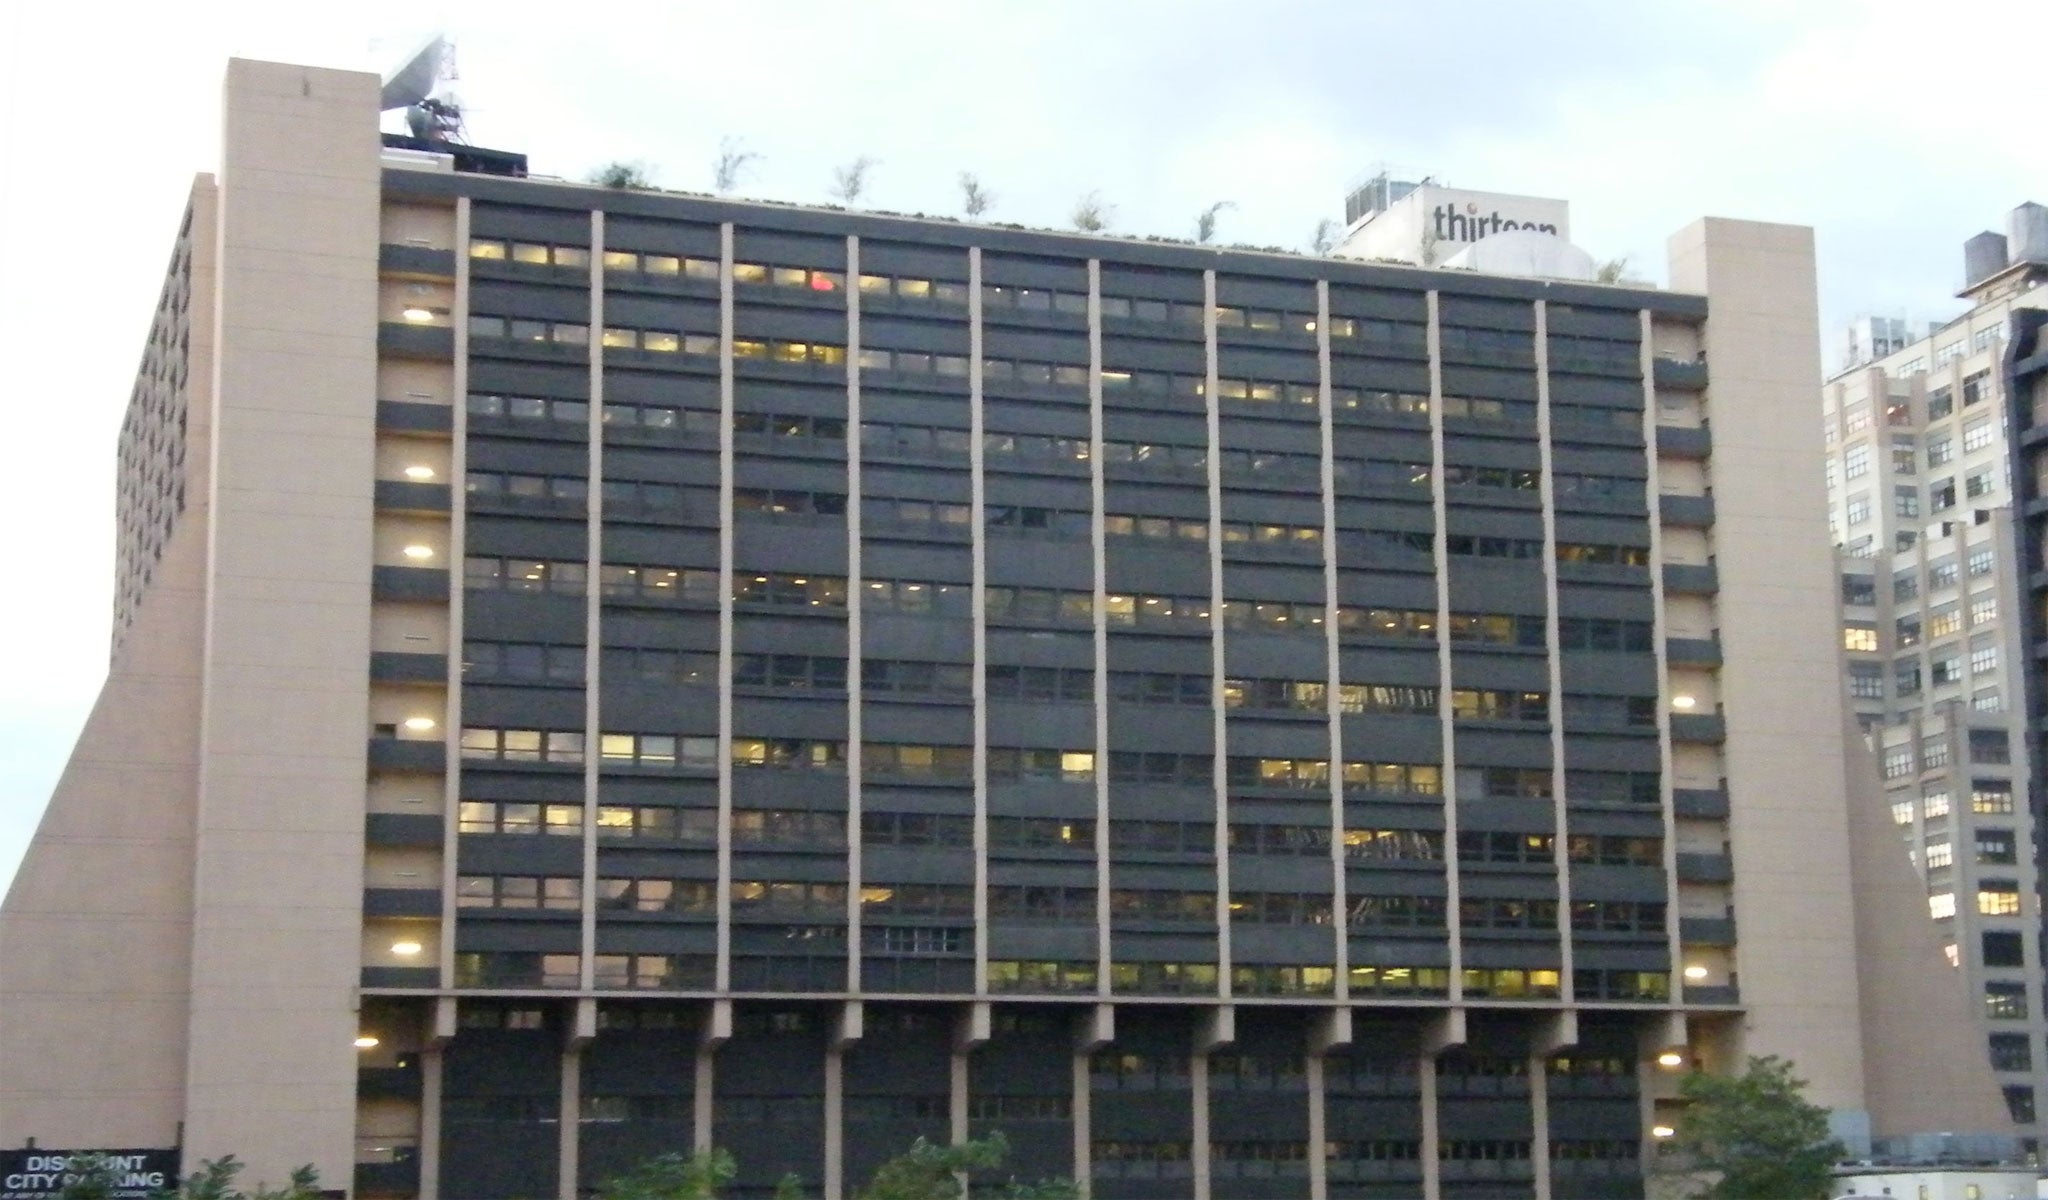 AP headquarters at 450 West 33rd Street, New York City